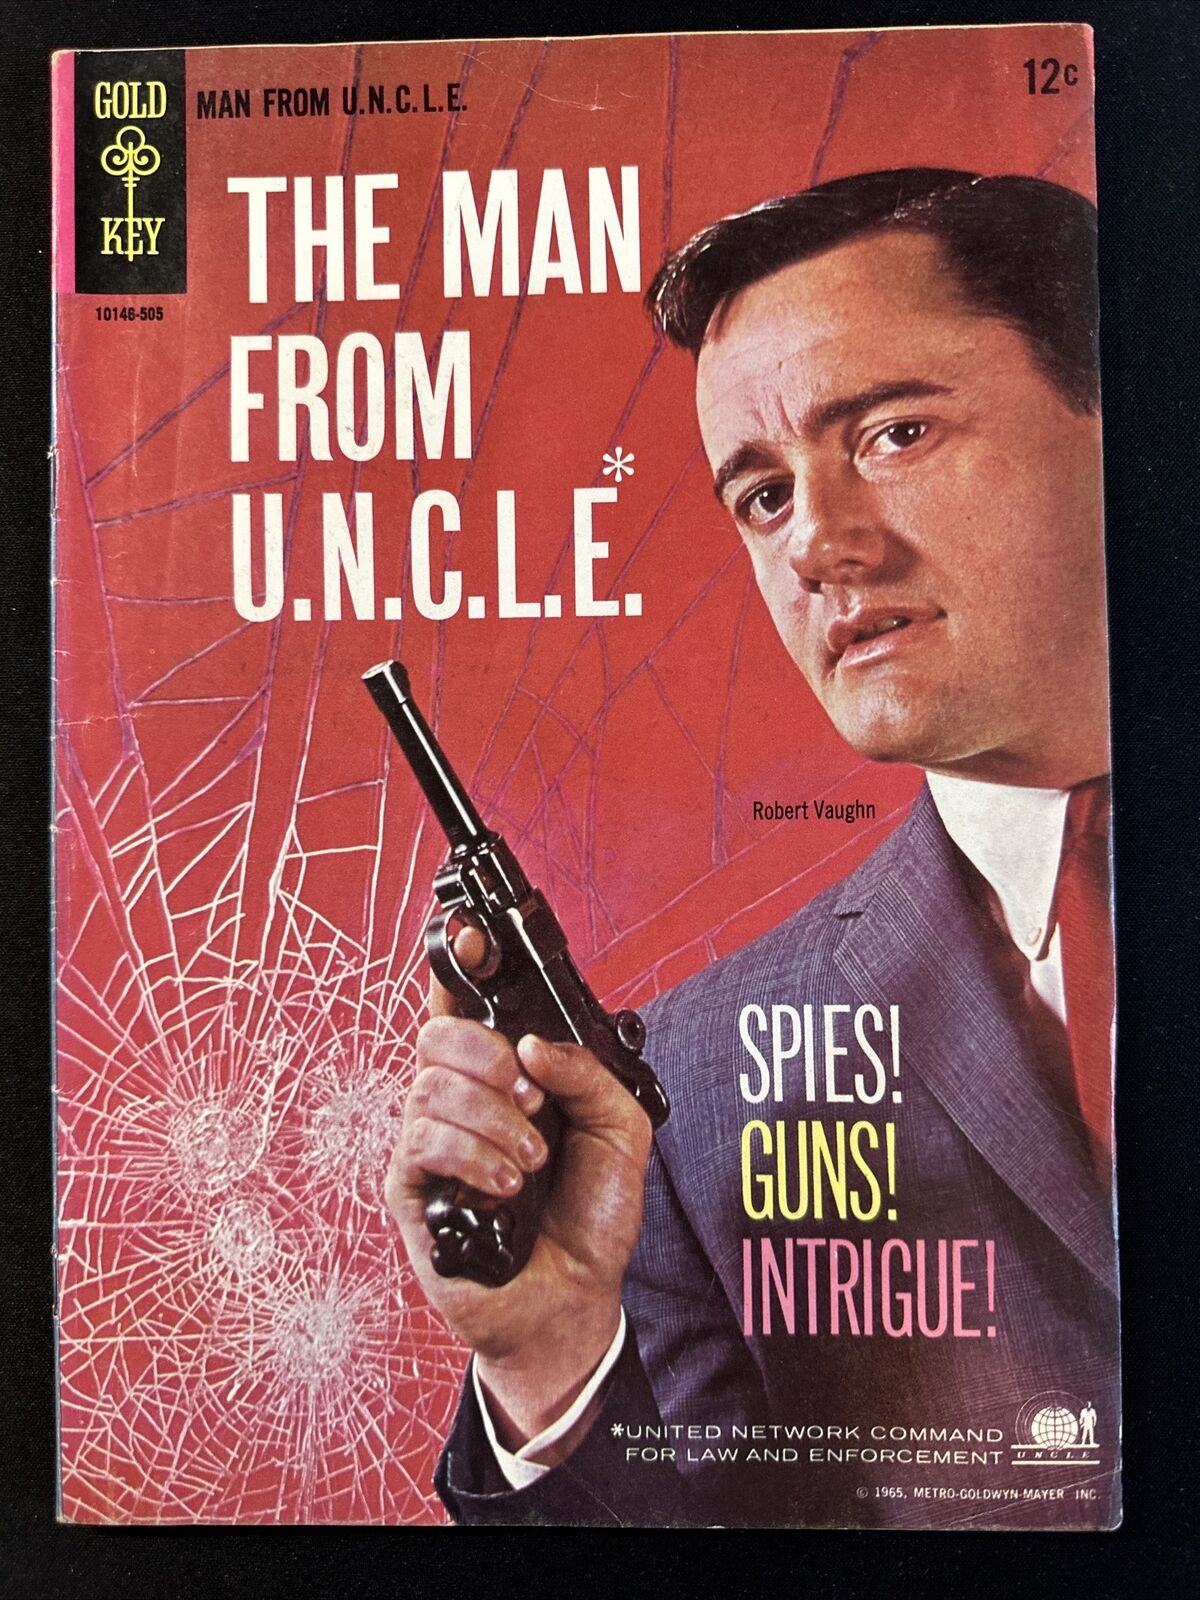 The Man From UNCLE #1 Gold Key Vintage Comics Silver Age TV Show 1965 VG *A1